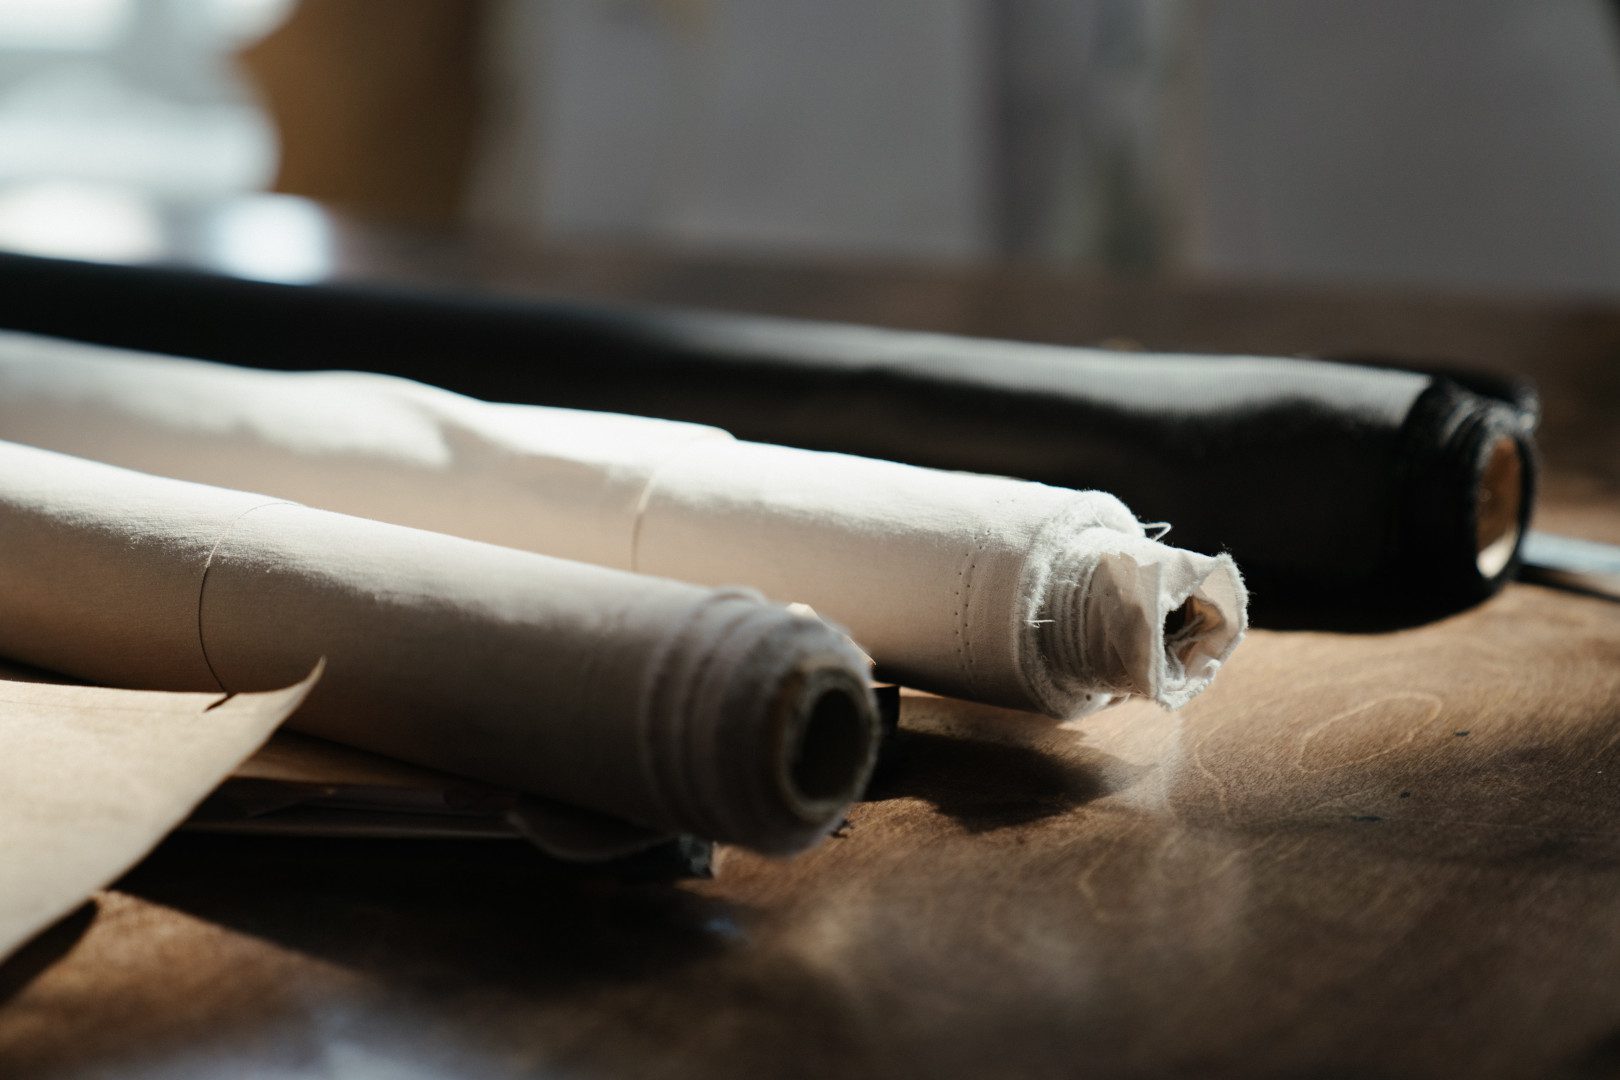 A close up of two rolled up paper